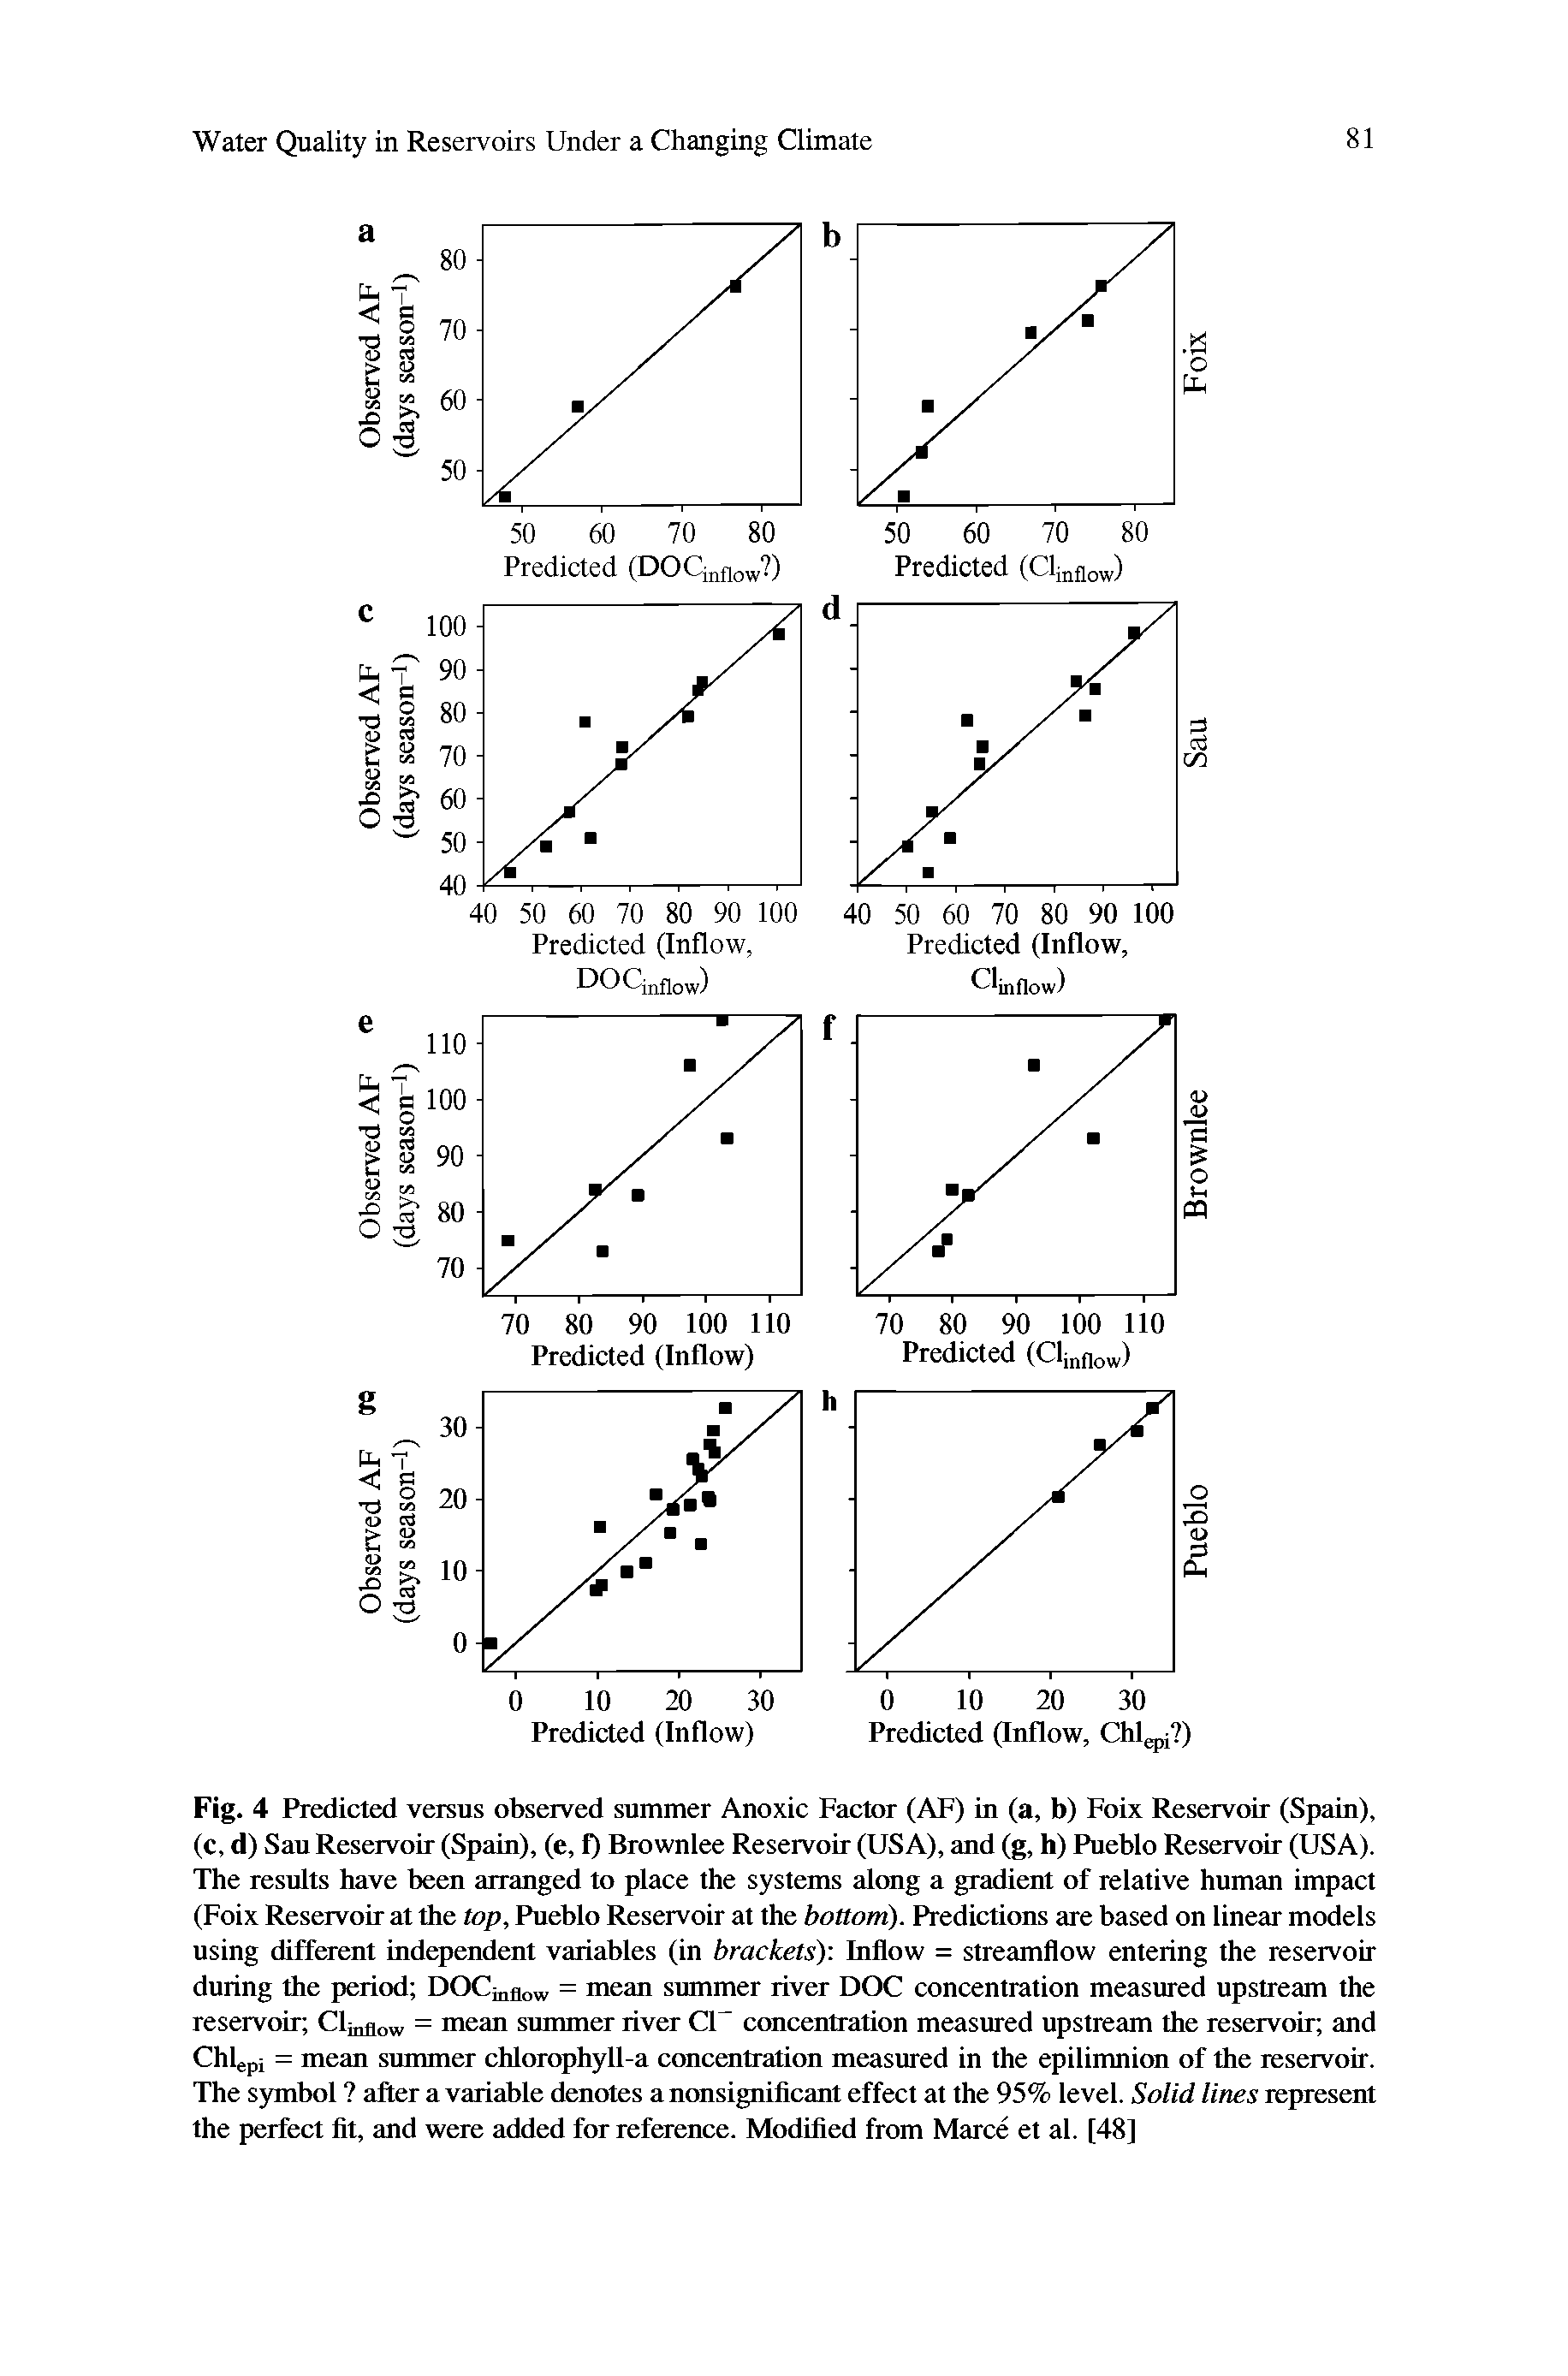 Fig. 4 Predicted versus observed summer Anoxic Factor (AF) in (a, b) Foix Reservoir (Spain), (c, d) San Reservoir (Spain), (e, f) Brownlee Reservoir (USA), and (g, h) Pueblo Reservoir (USA). The results have been arranged to place the systems along a gradient of relative human impact (Foix Reservoir at the top, Pueblo Reservoir at the bottom). Predictions are based on linear models using different independent variables (in brackets) Inflow = streamflow entering the reservoir during the period DOCjjiflow = mean summer river DOC concentration measured upstream the reservoir CljjjAow = mean summer river CU concentration measured upstream the reservoir and Chlepi = mean summer chlorophyll-a concentration measured in the epilimnion of the reservoir. The symbol after a variable denotes a nonsignificant effect at the 95% level. Solid lines represent the perfect fit, and were added for reference. Modified from Marce et al. [48]...